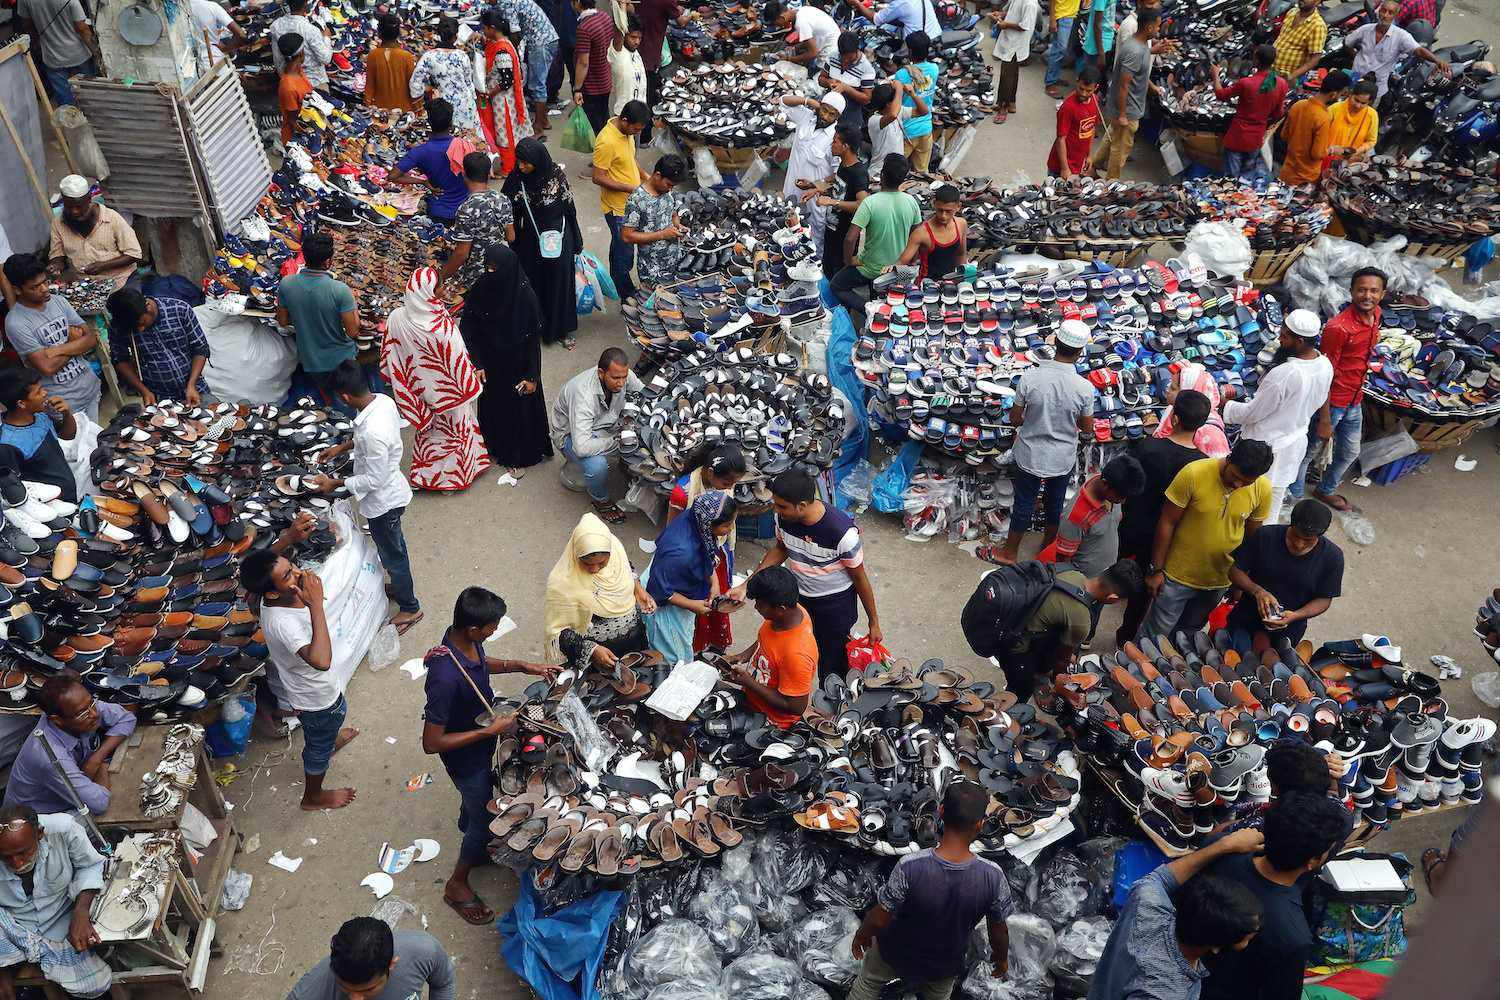 People gather at a street shoe market in Dhaka. Photo: Reuters